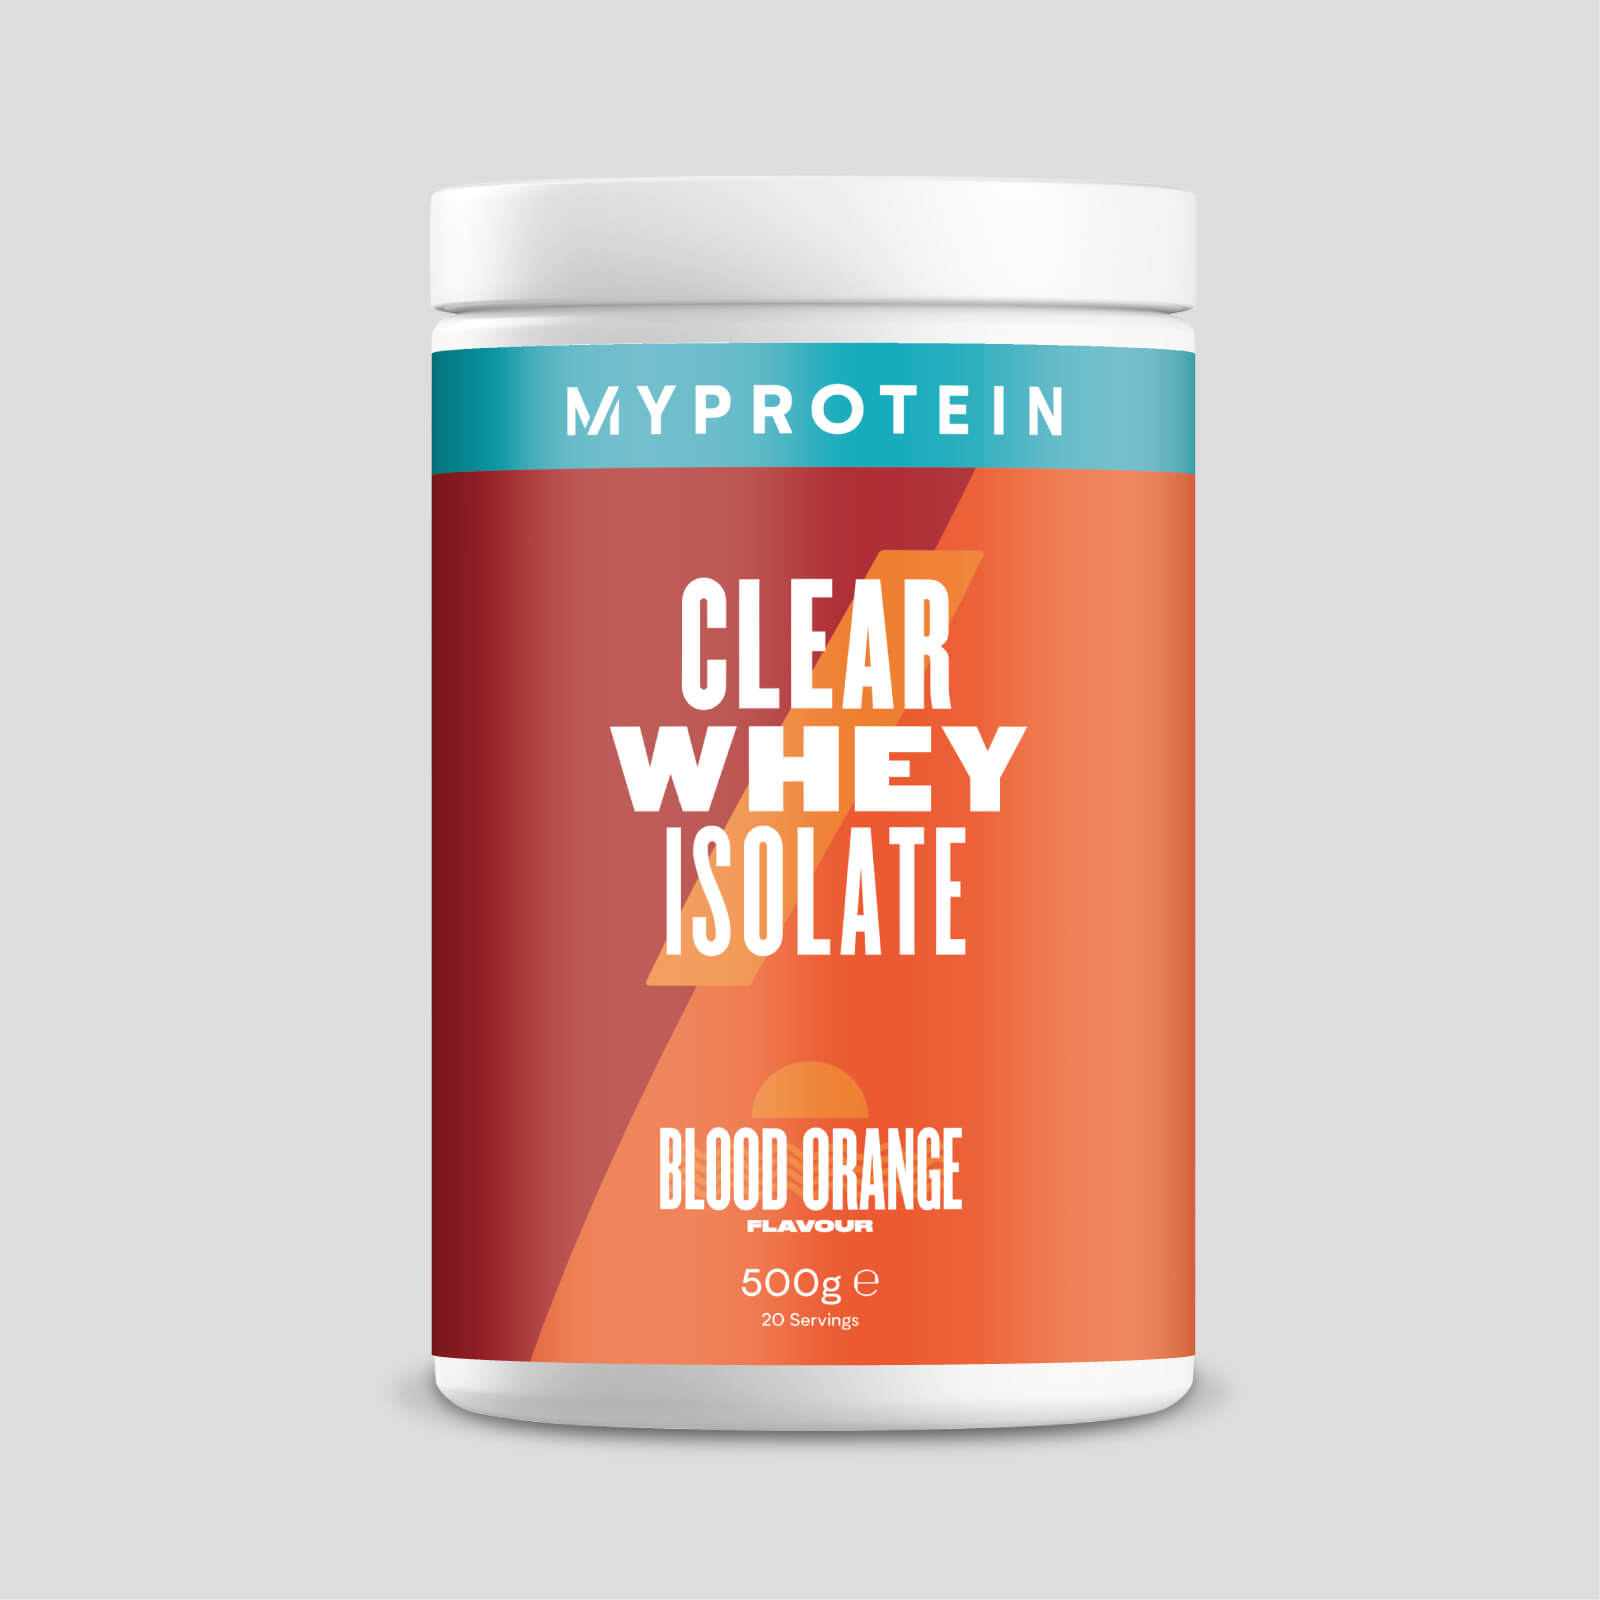 Clear Whey Isolate - 20servings - Blood Orange